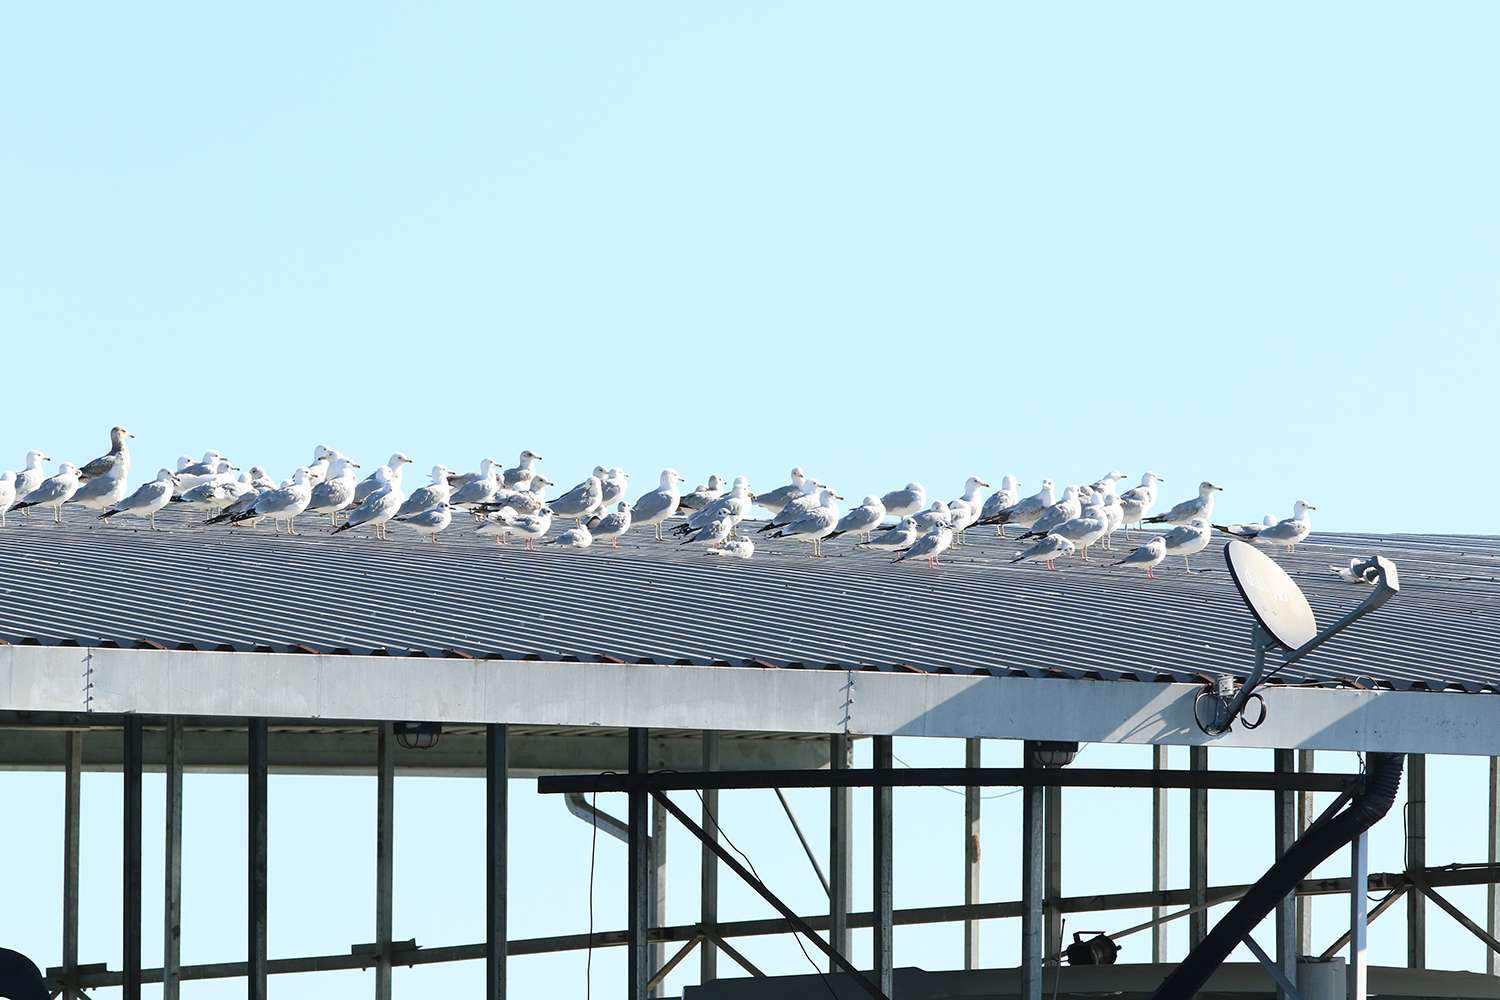 Gulls on a boathouse, 2019 Bassmaster Classic out of Knoxville, Tenn.